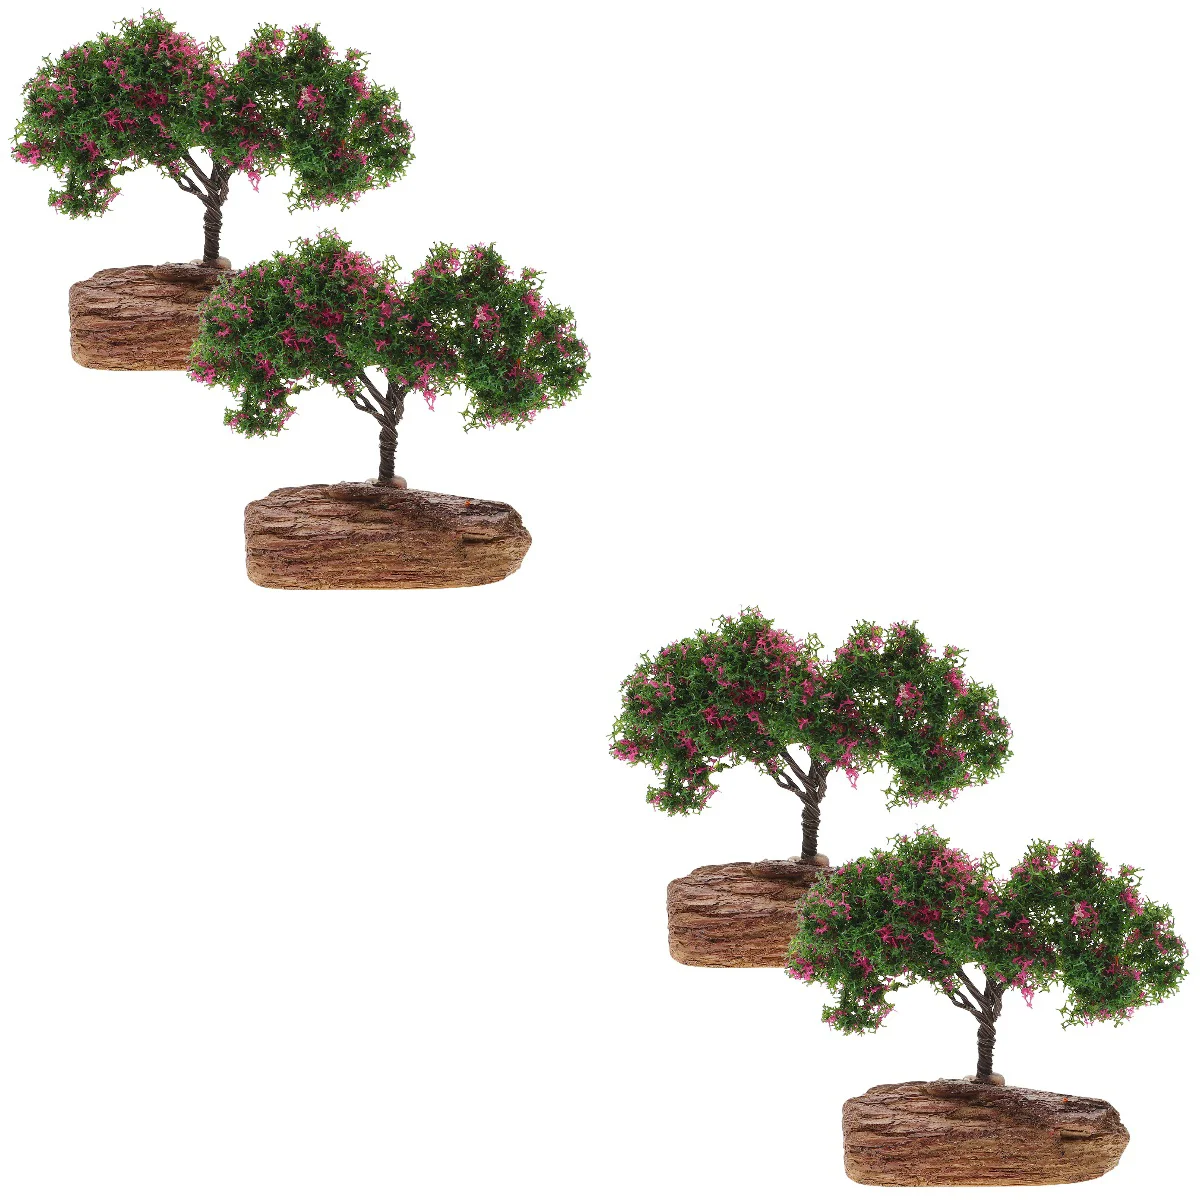 

4 Pcs Simulated Mini Tree Garden Decoration Landscape Model Miniatures Trees Crafts Green Scenery Home Sand Table DIY Lucky